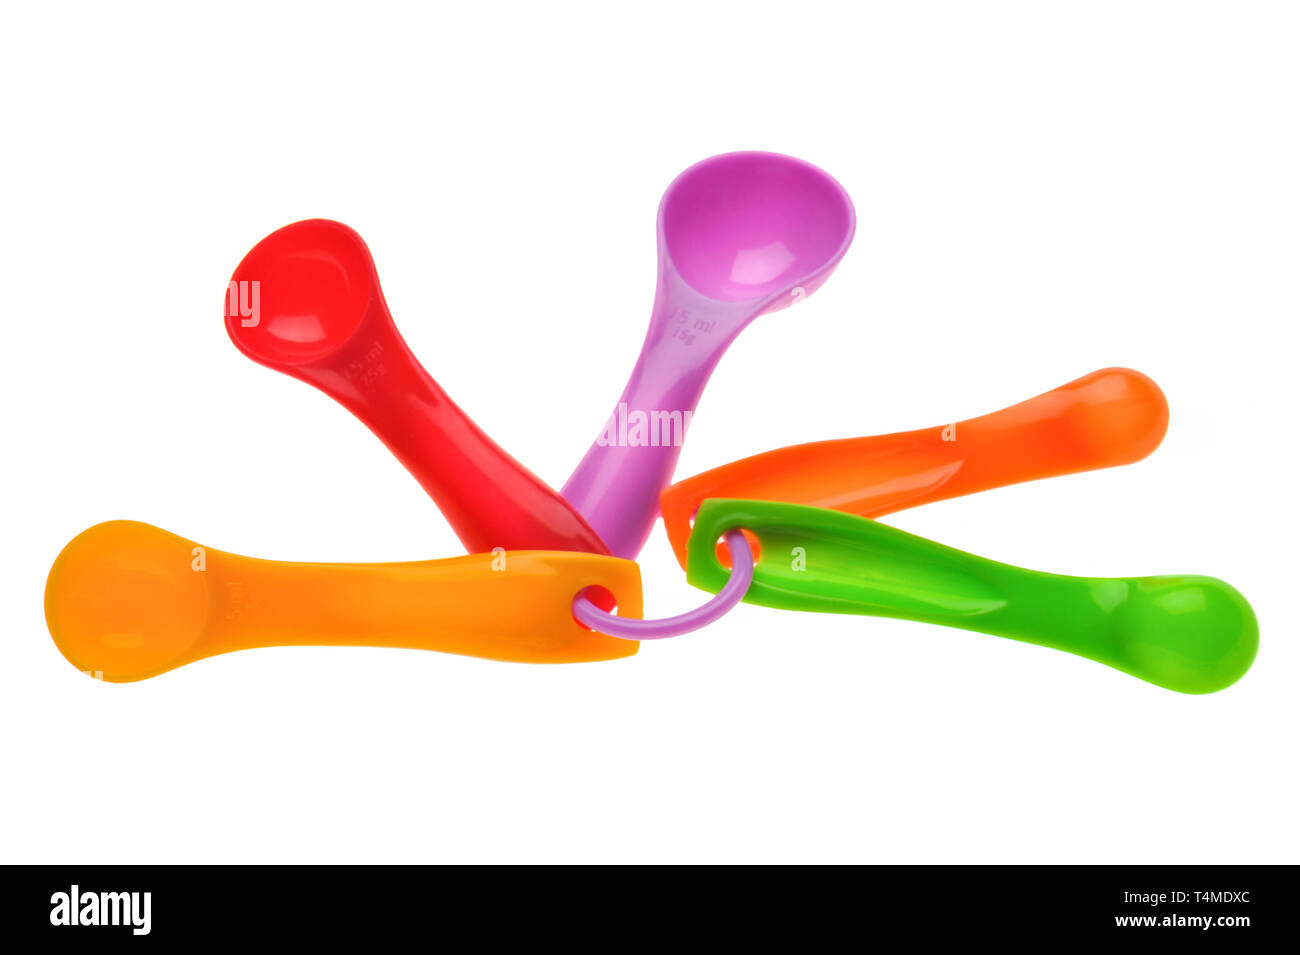 https://c8.alamy.com/comp/T4MDXC/multicolored-plastic-measuring-spoons-in-grams-isolated-on-white-T4MDXC.jpg